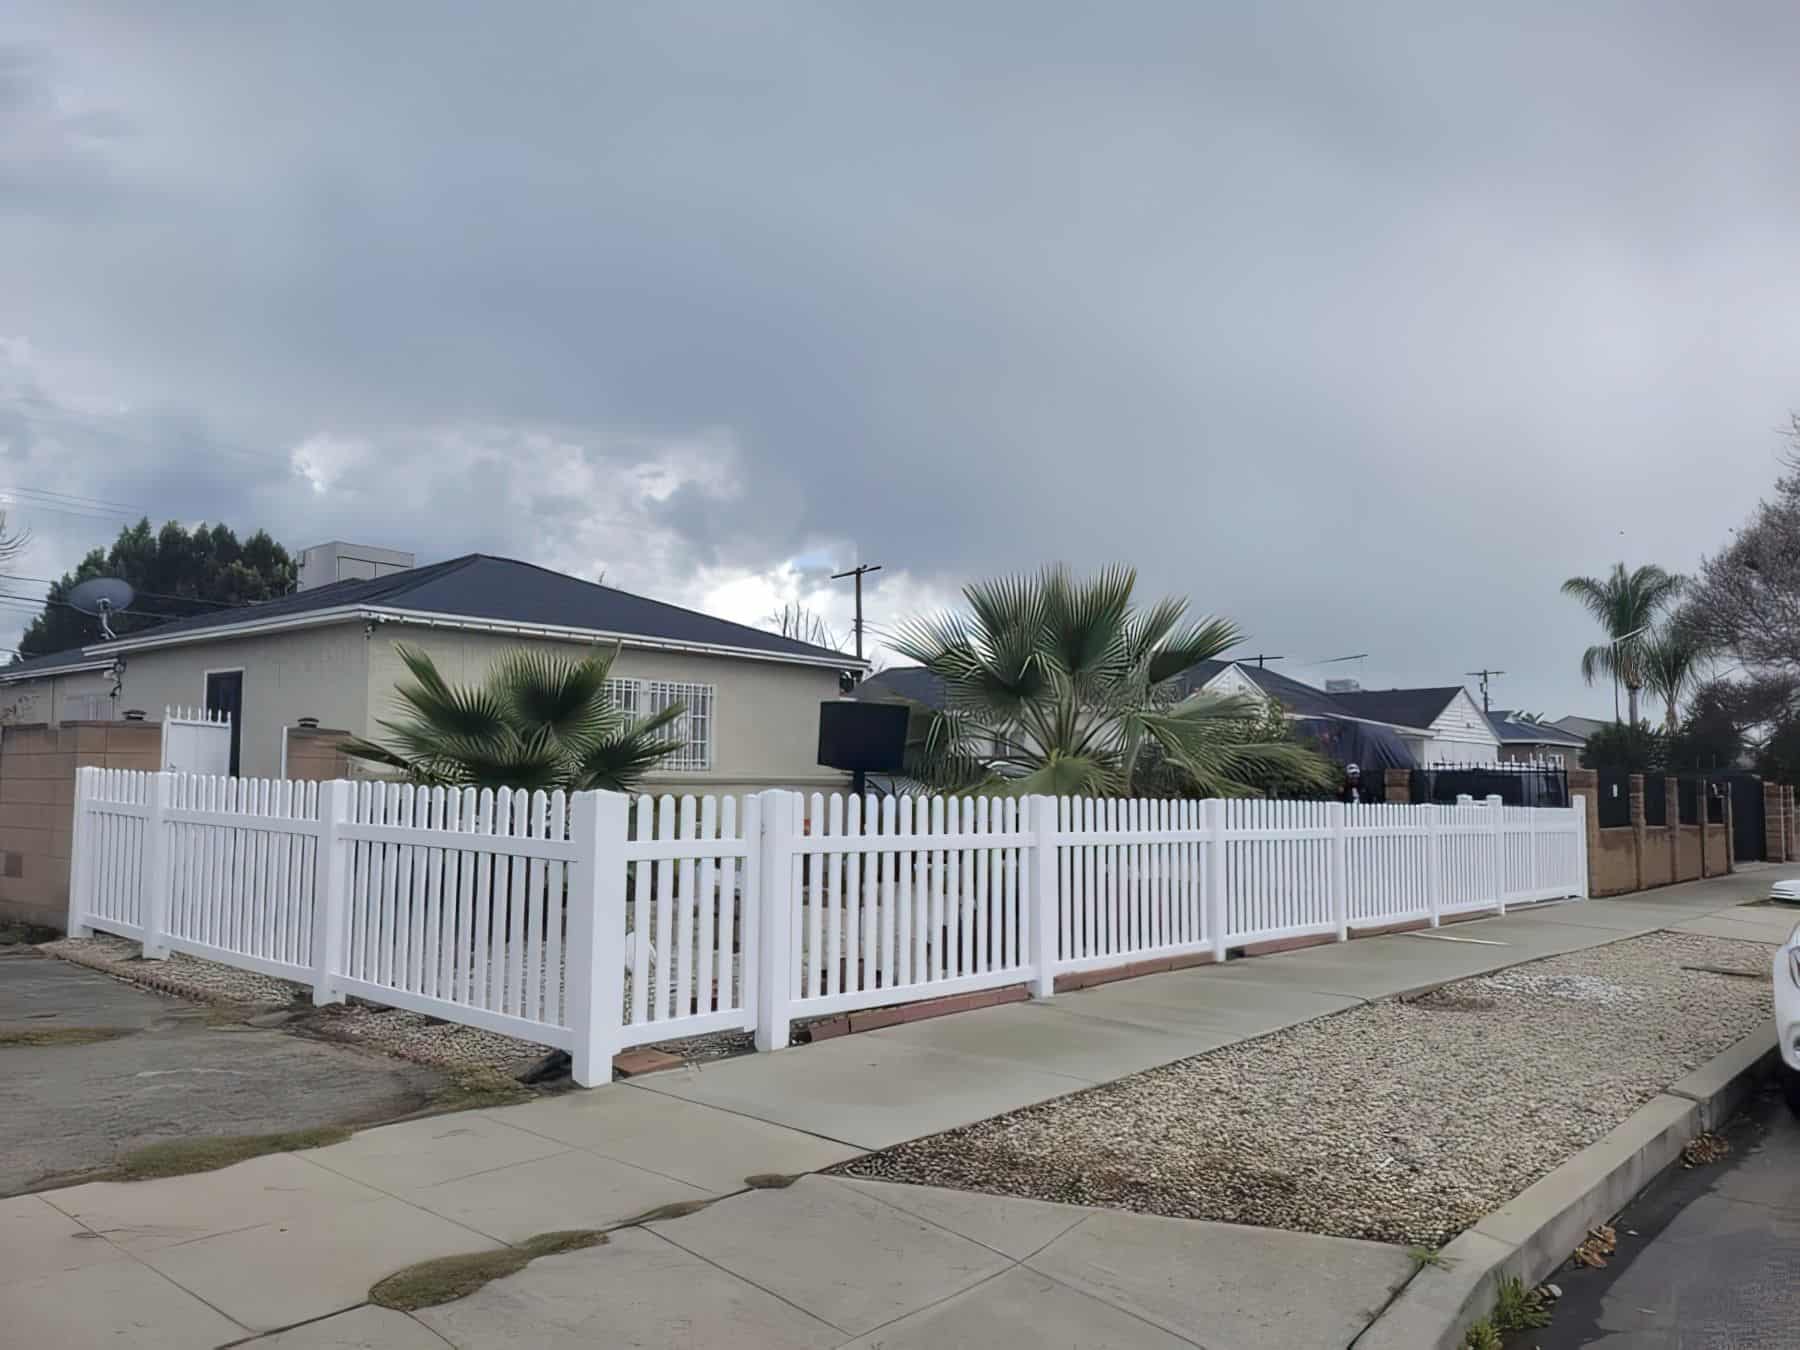 Vinyl vertical picket fence surrounding the house with tall palm trees in the front yard and a pavement outside it.